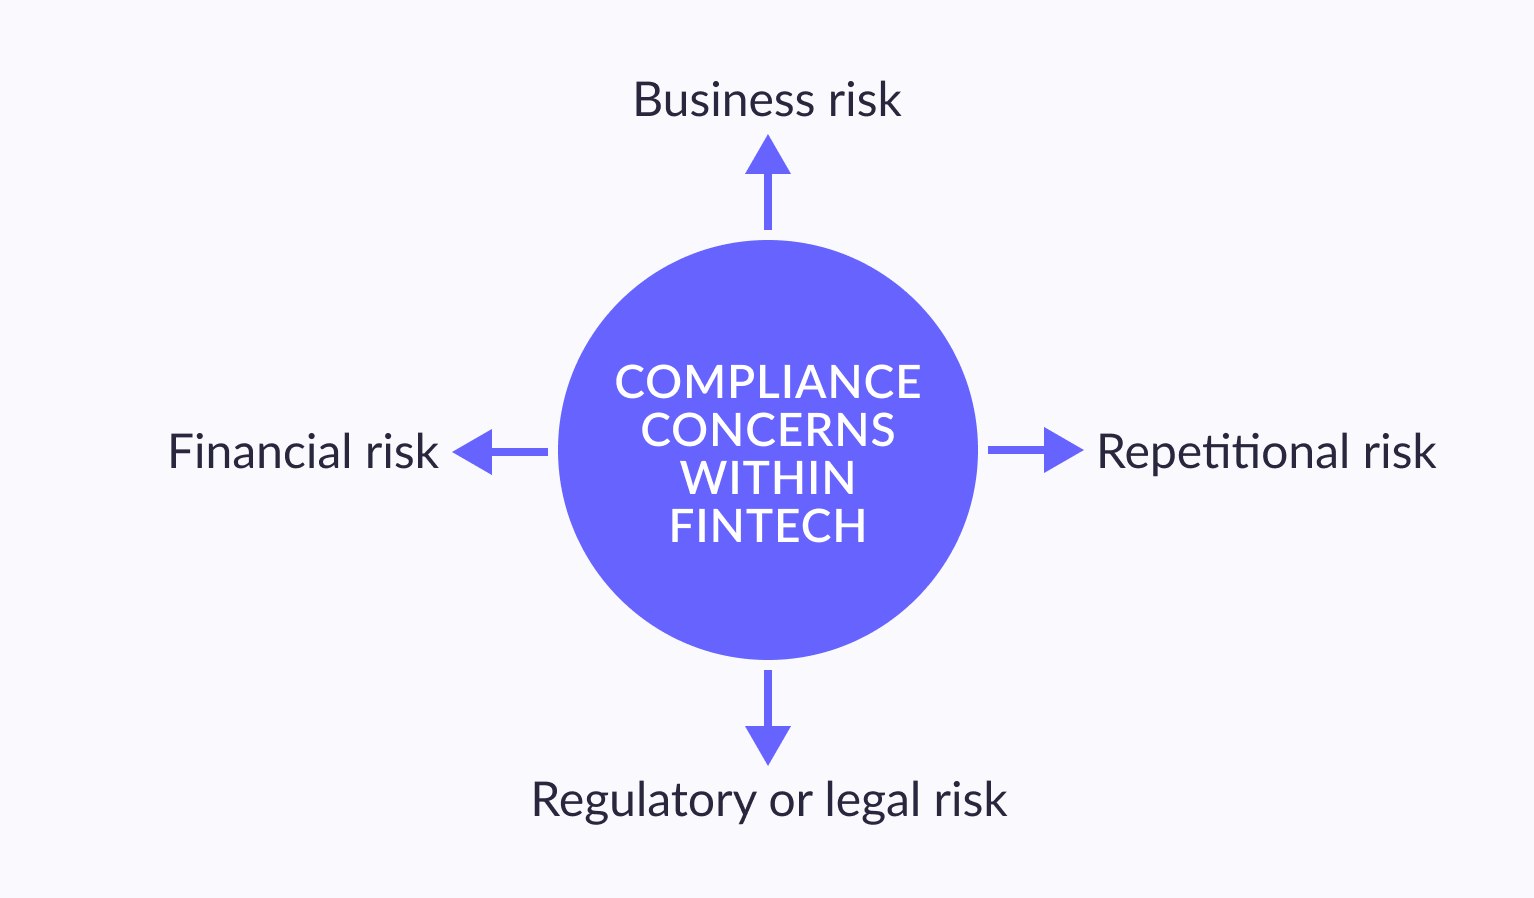 Compliance concerns within FinTech